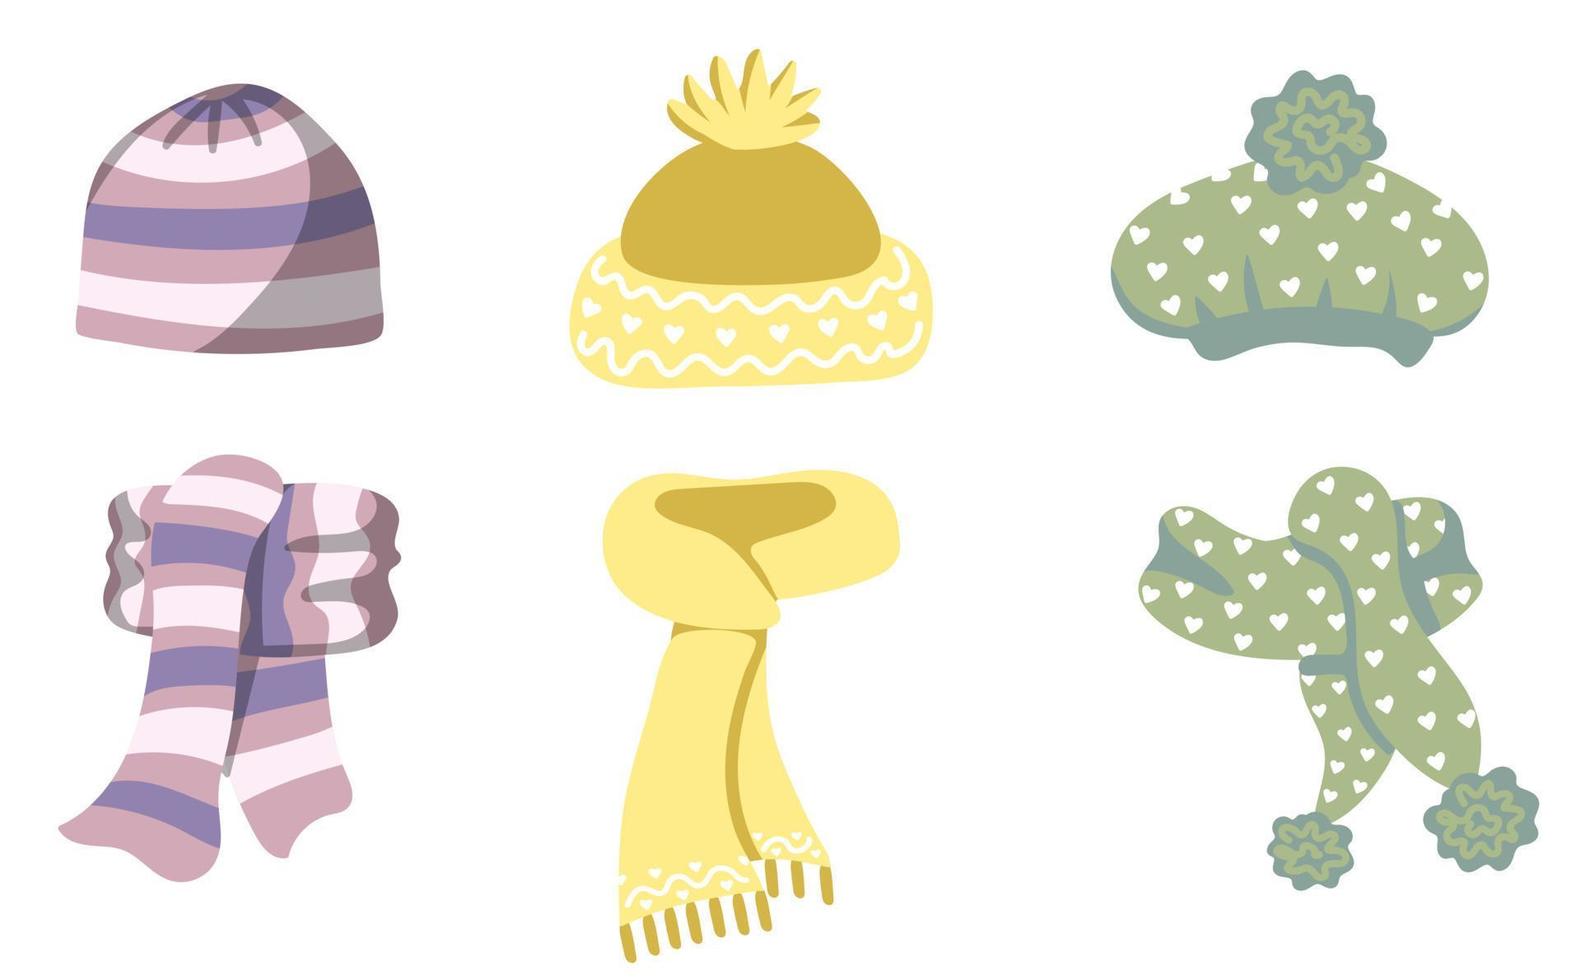 Winter knitted scarves and hats, traditional winter set. Warm clothes vector